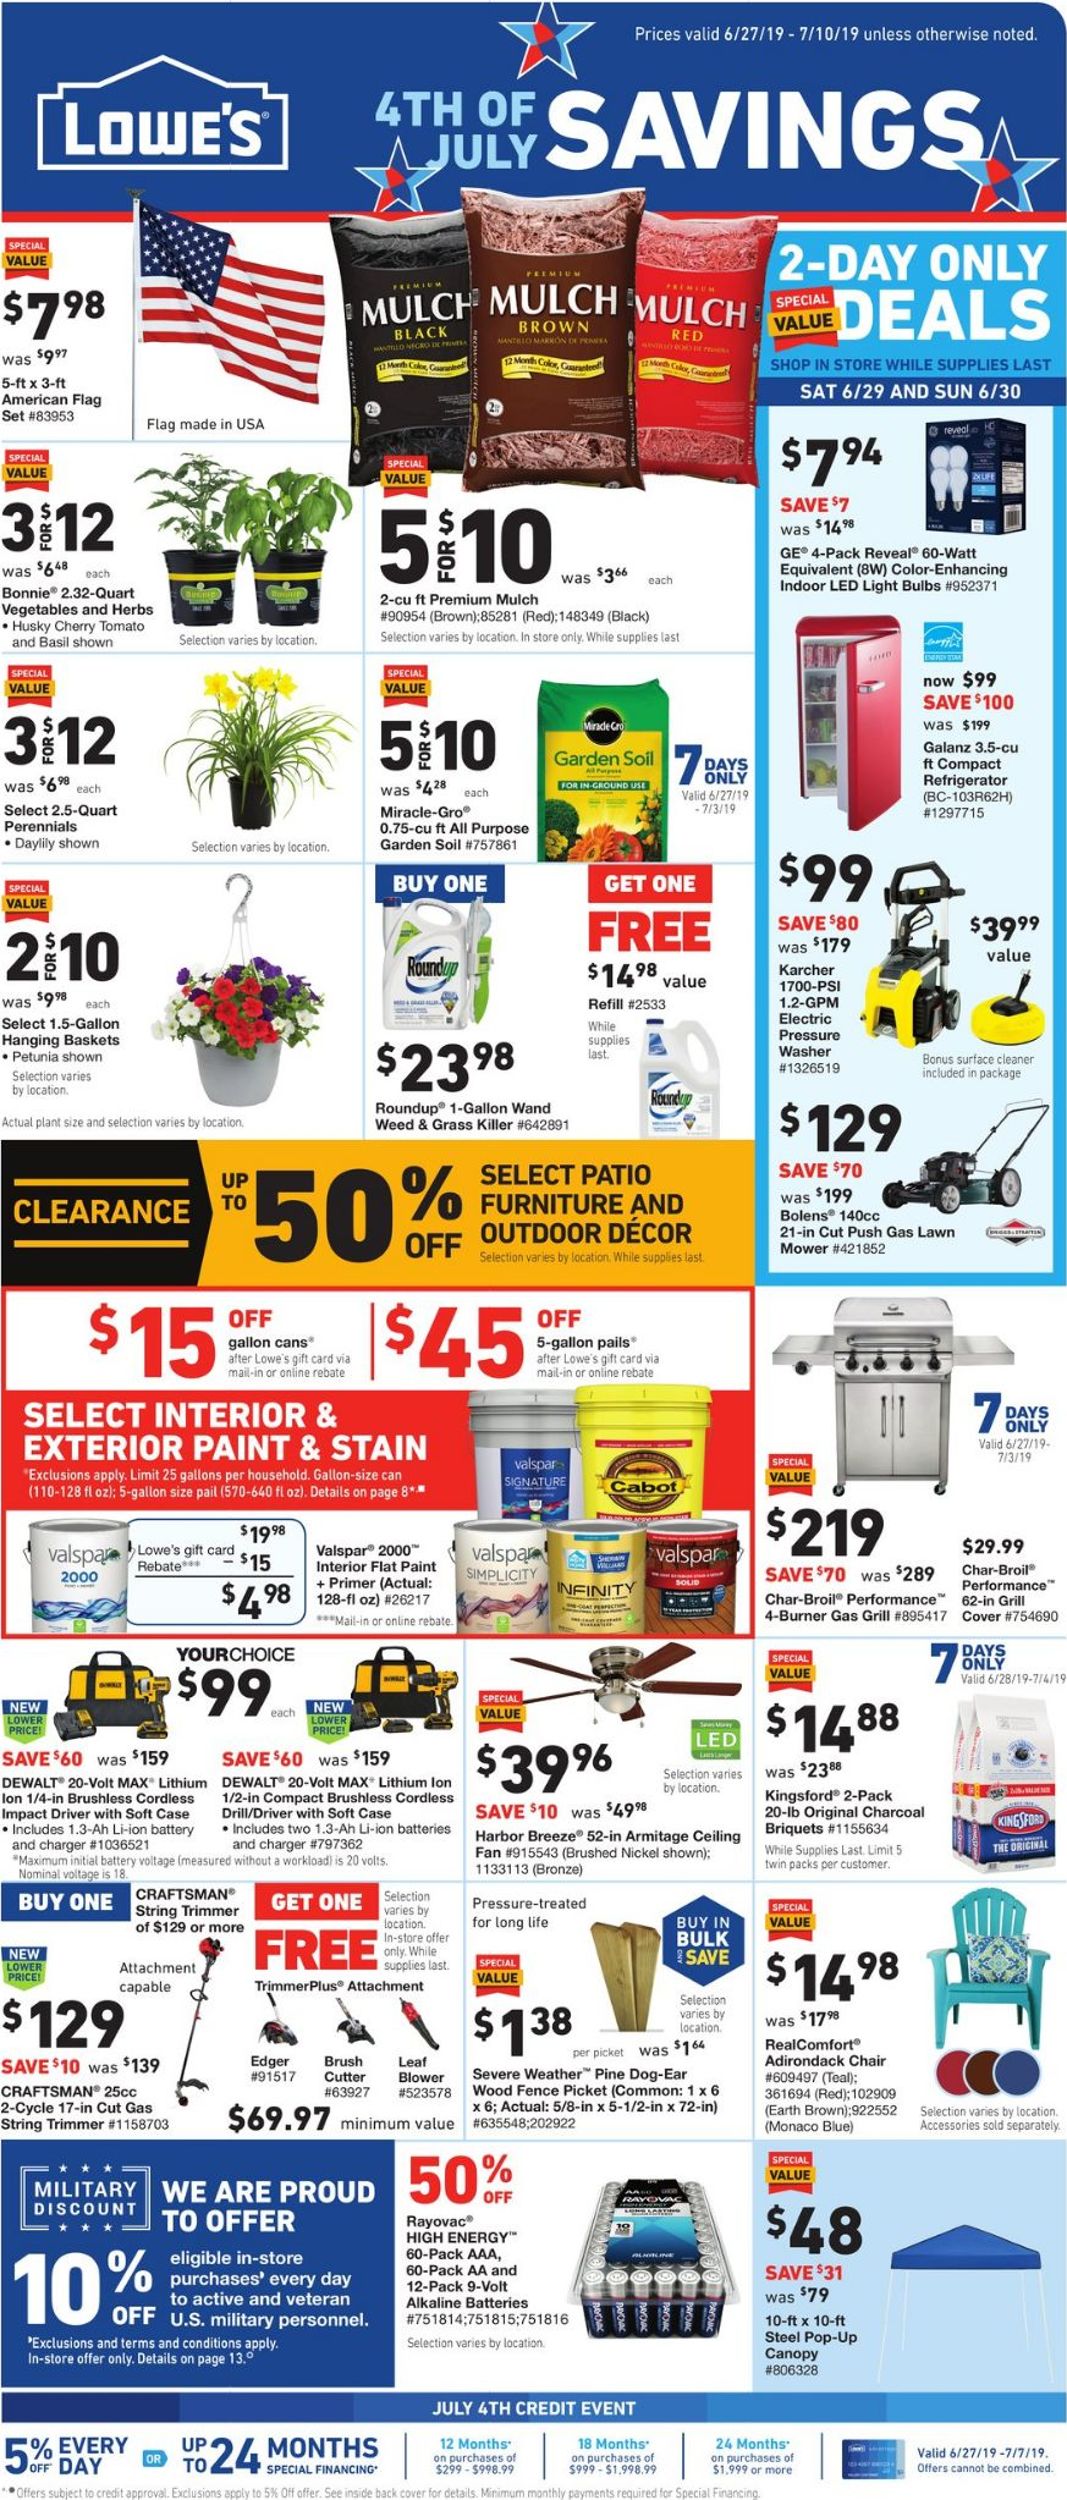 Lowe's Current weekly ad 06/27 07/10/2019